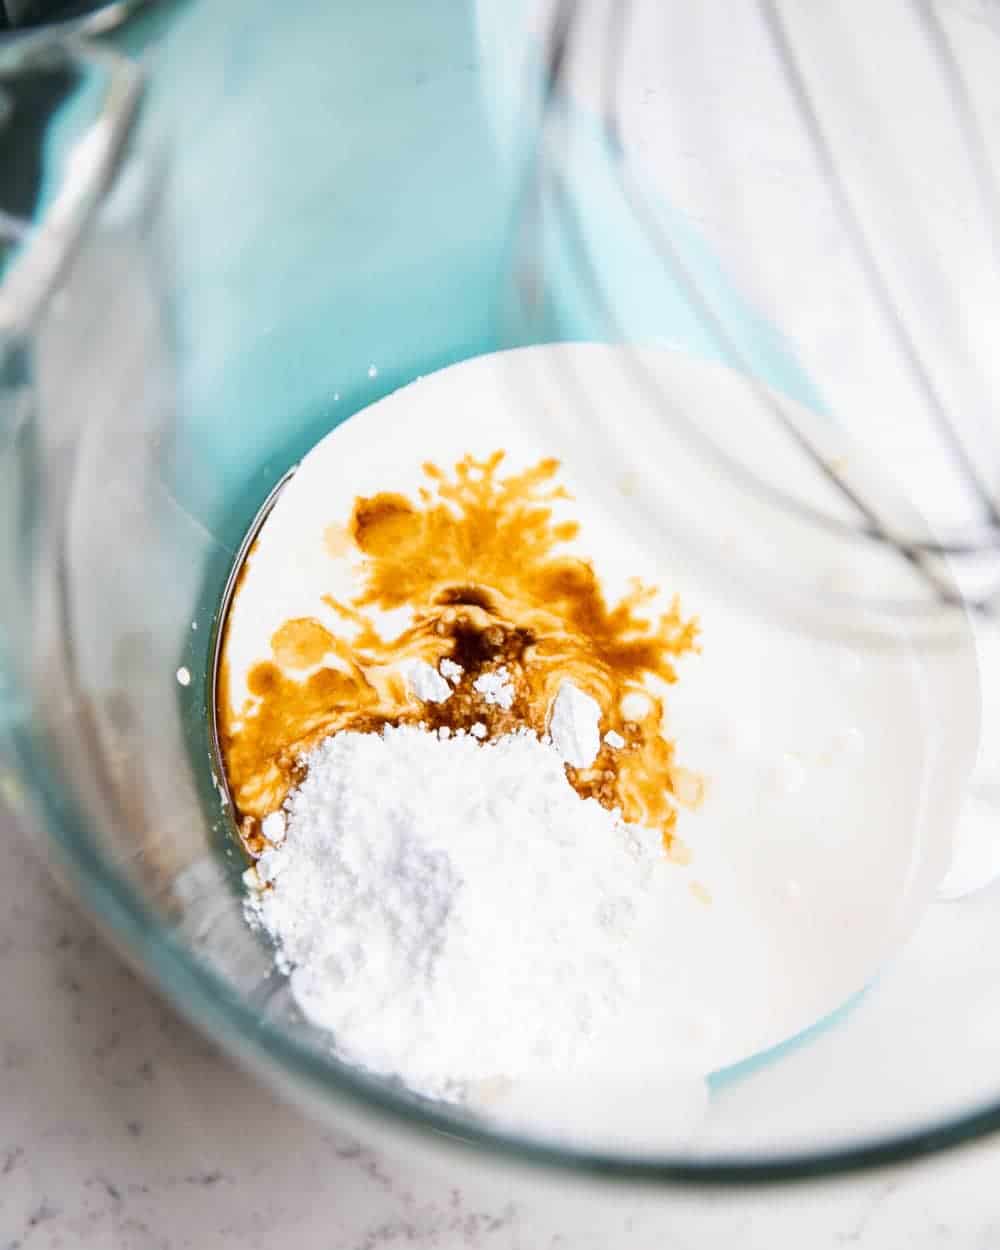 Whipped cream ingredients in a mixing bowl.